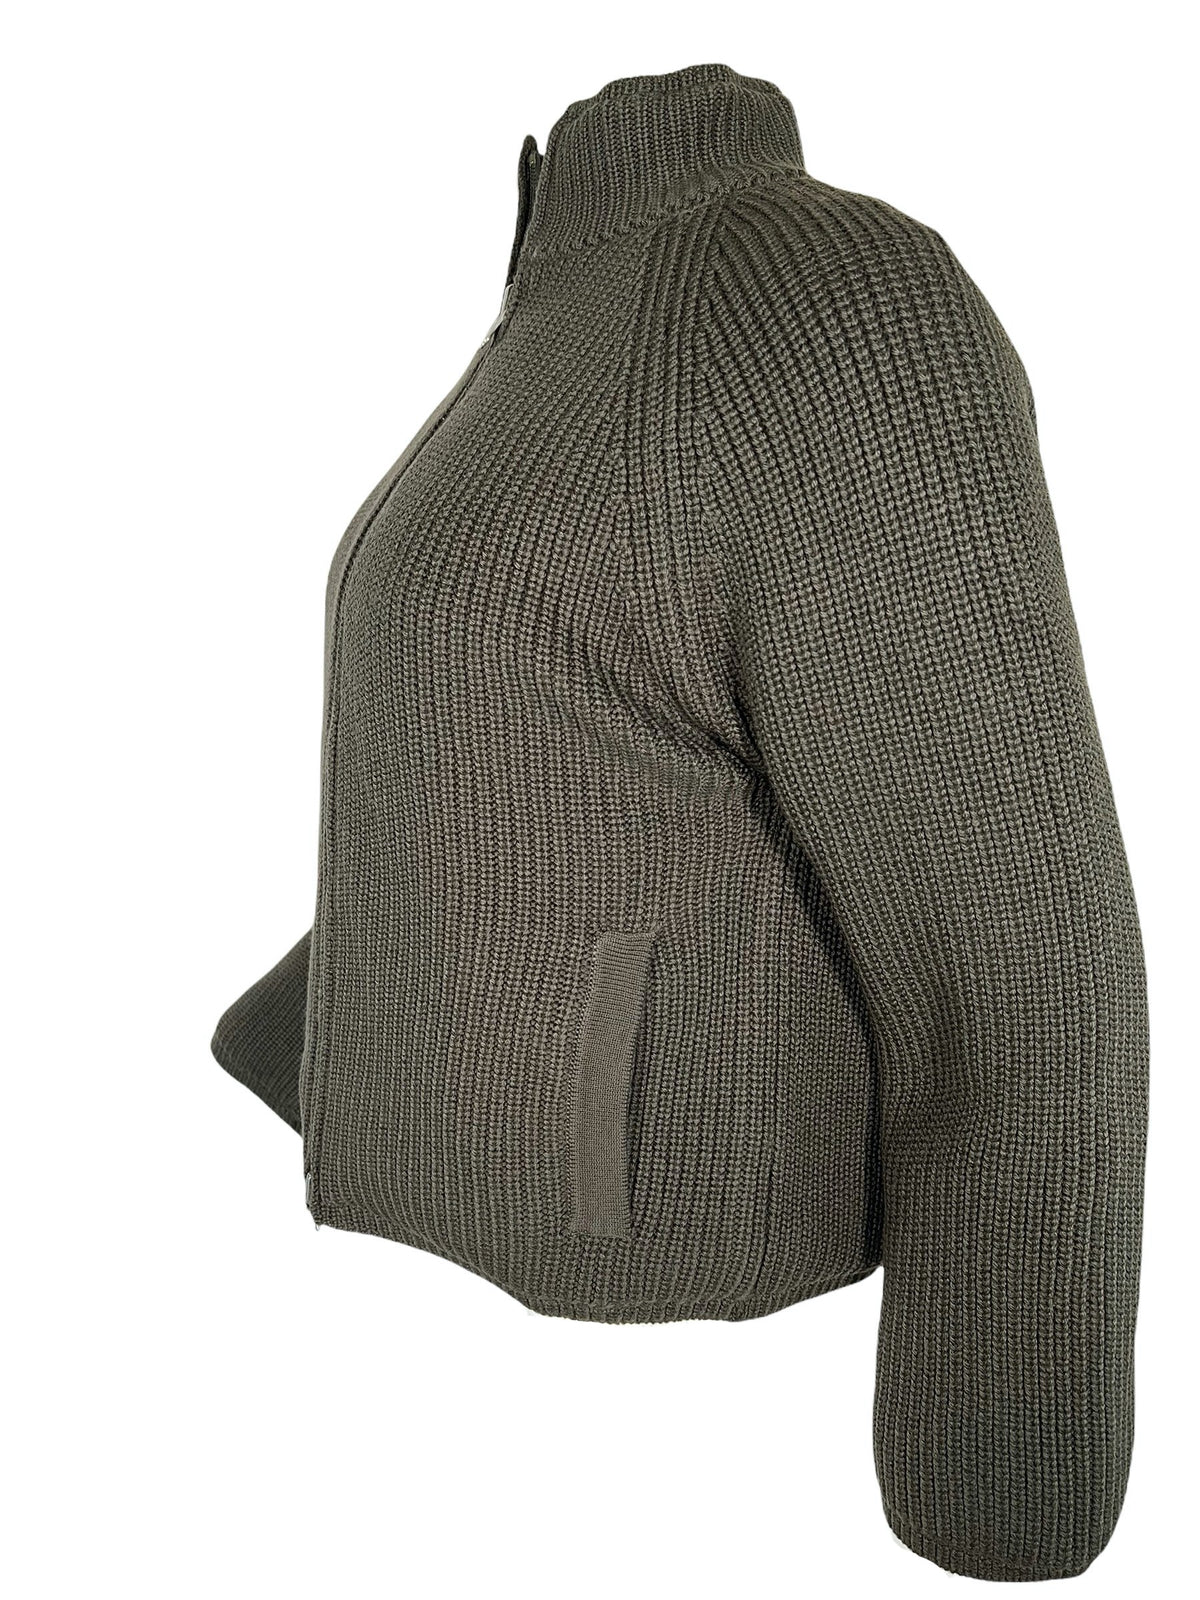 BUTTON DOWN WOMEN’S FULL ZIP RIBBED REVERSIBLE WOOL SWEATER JACKET - OLIVE